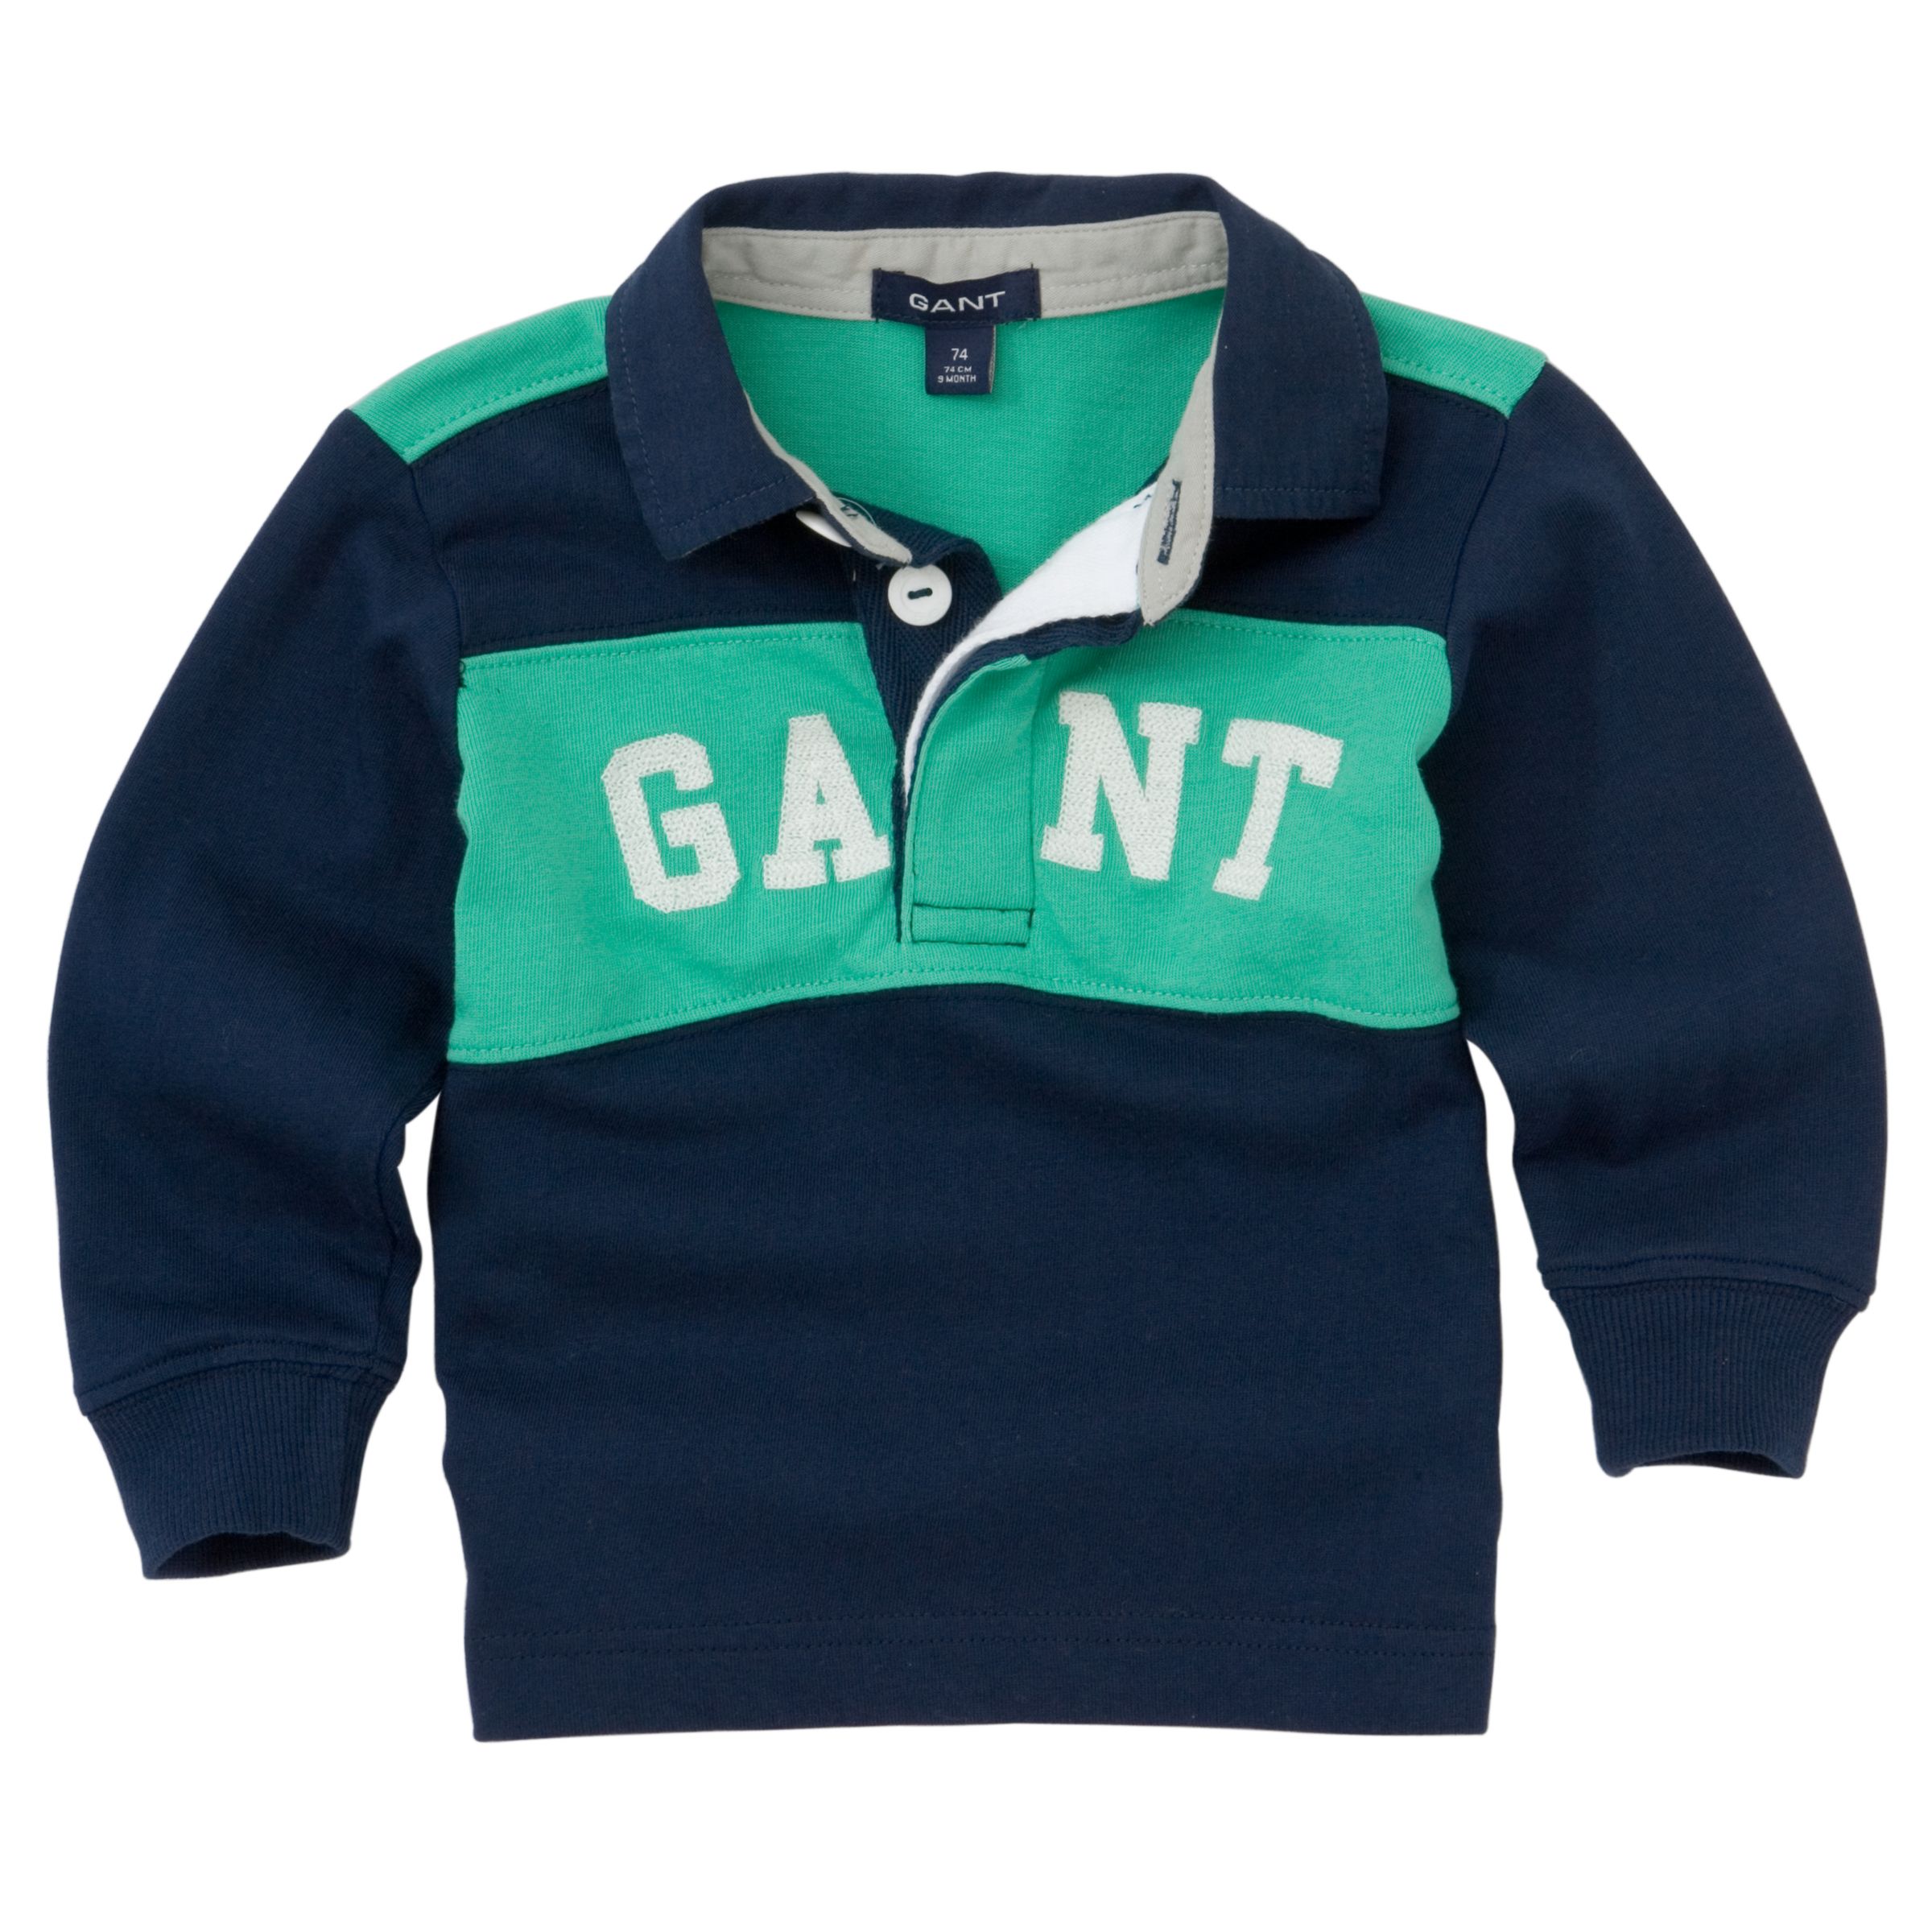 Branded Long Sleeve Rugby Shirt, Blue/Green